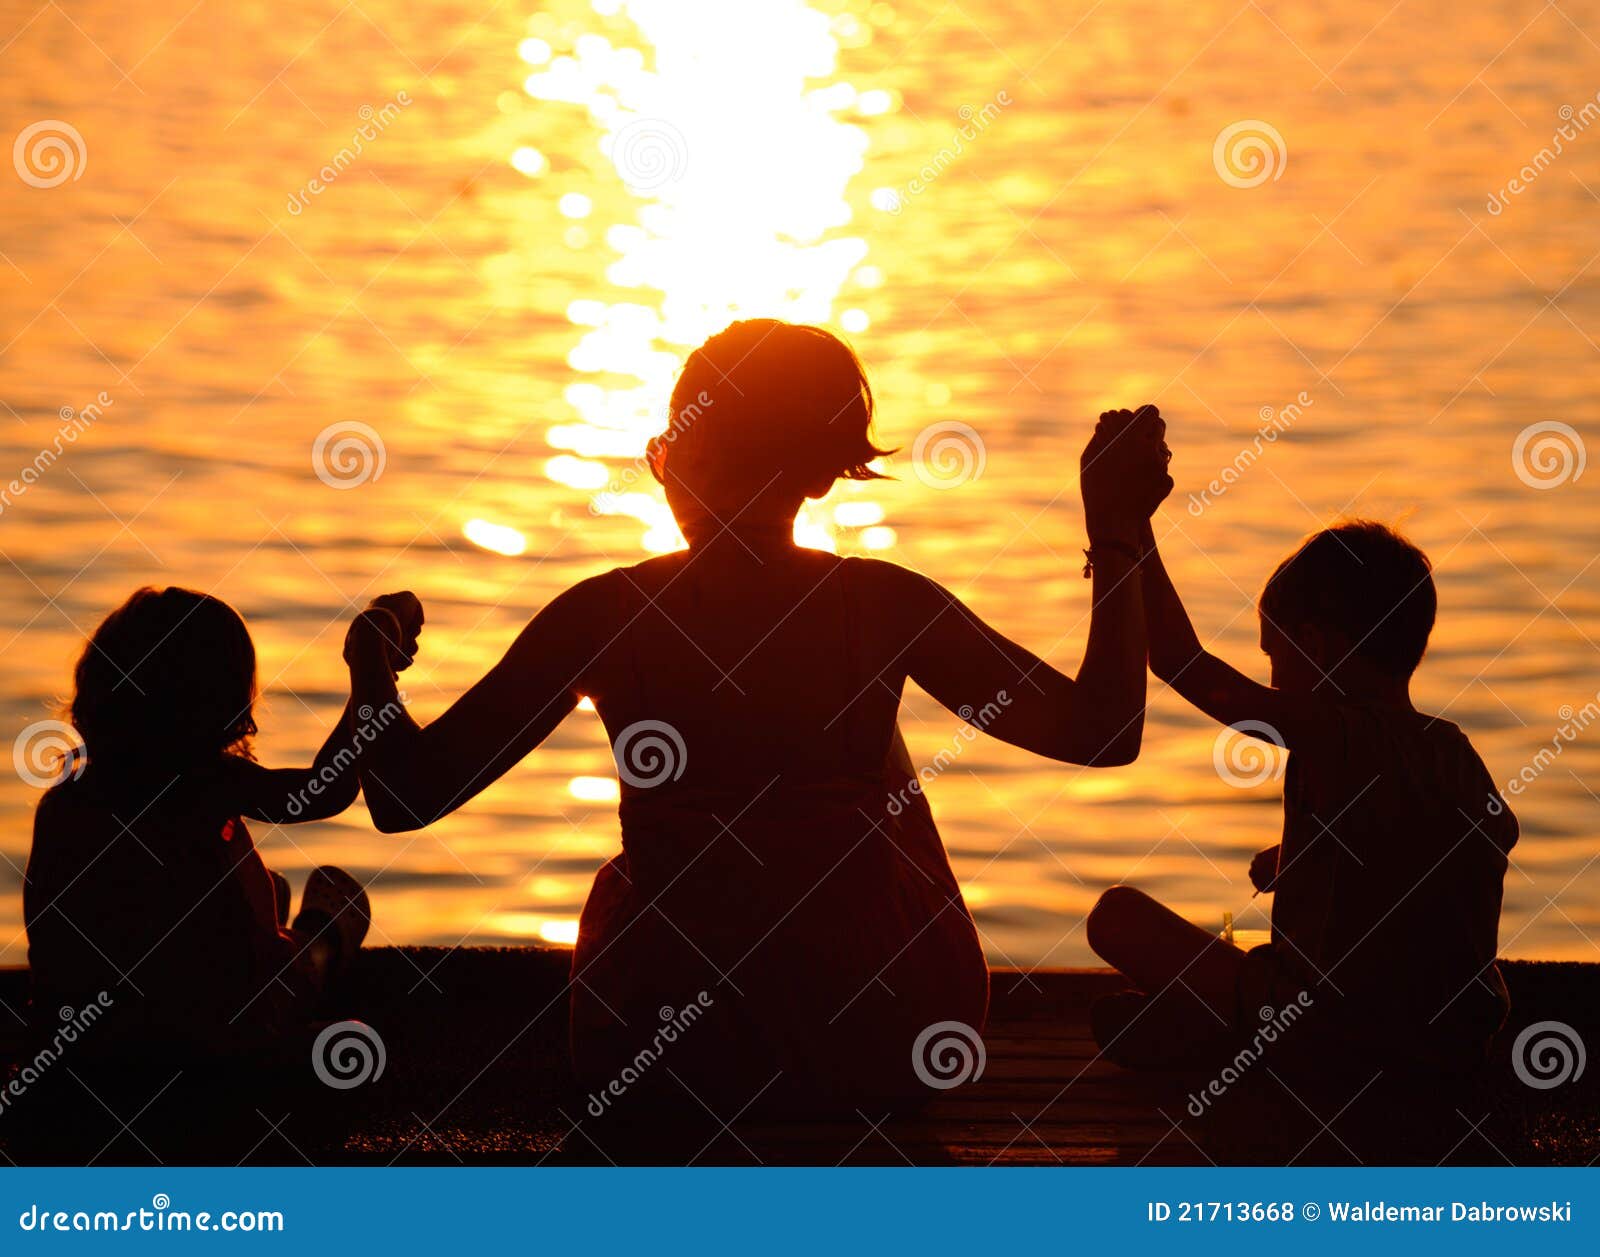 profiles of mother and children at sunset